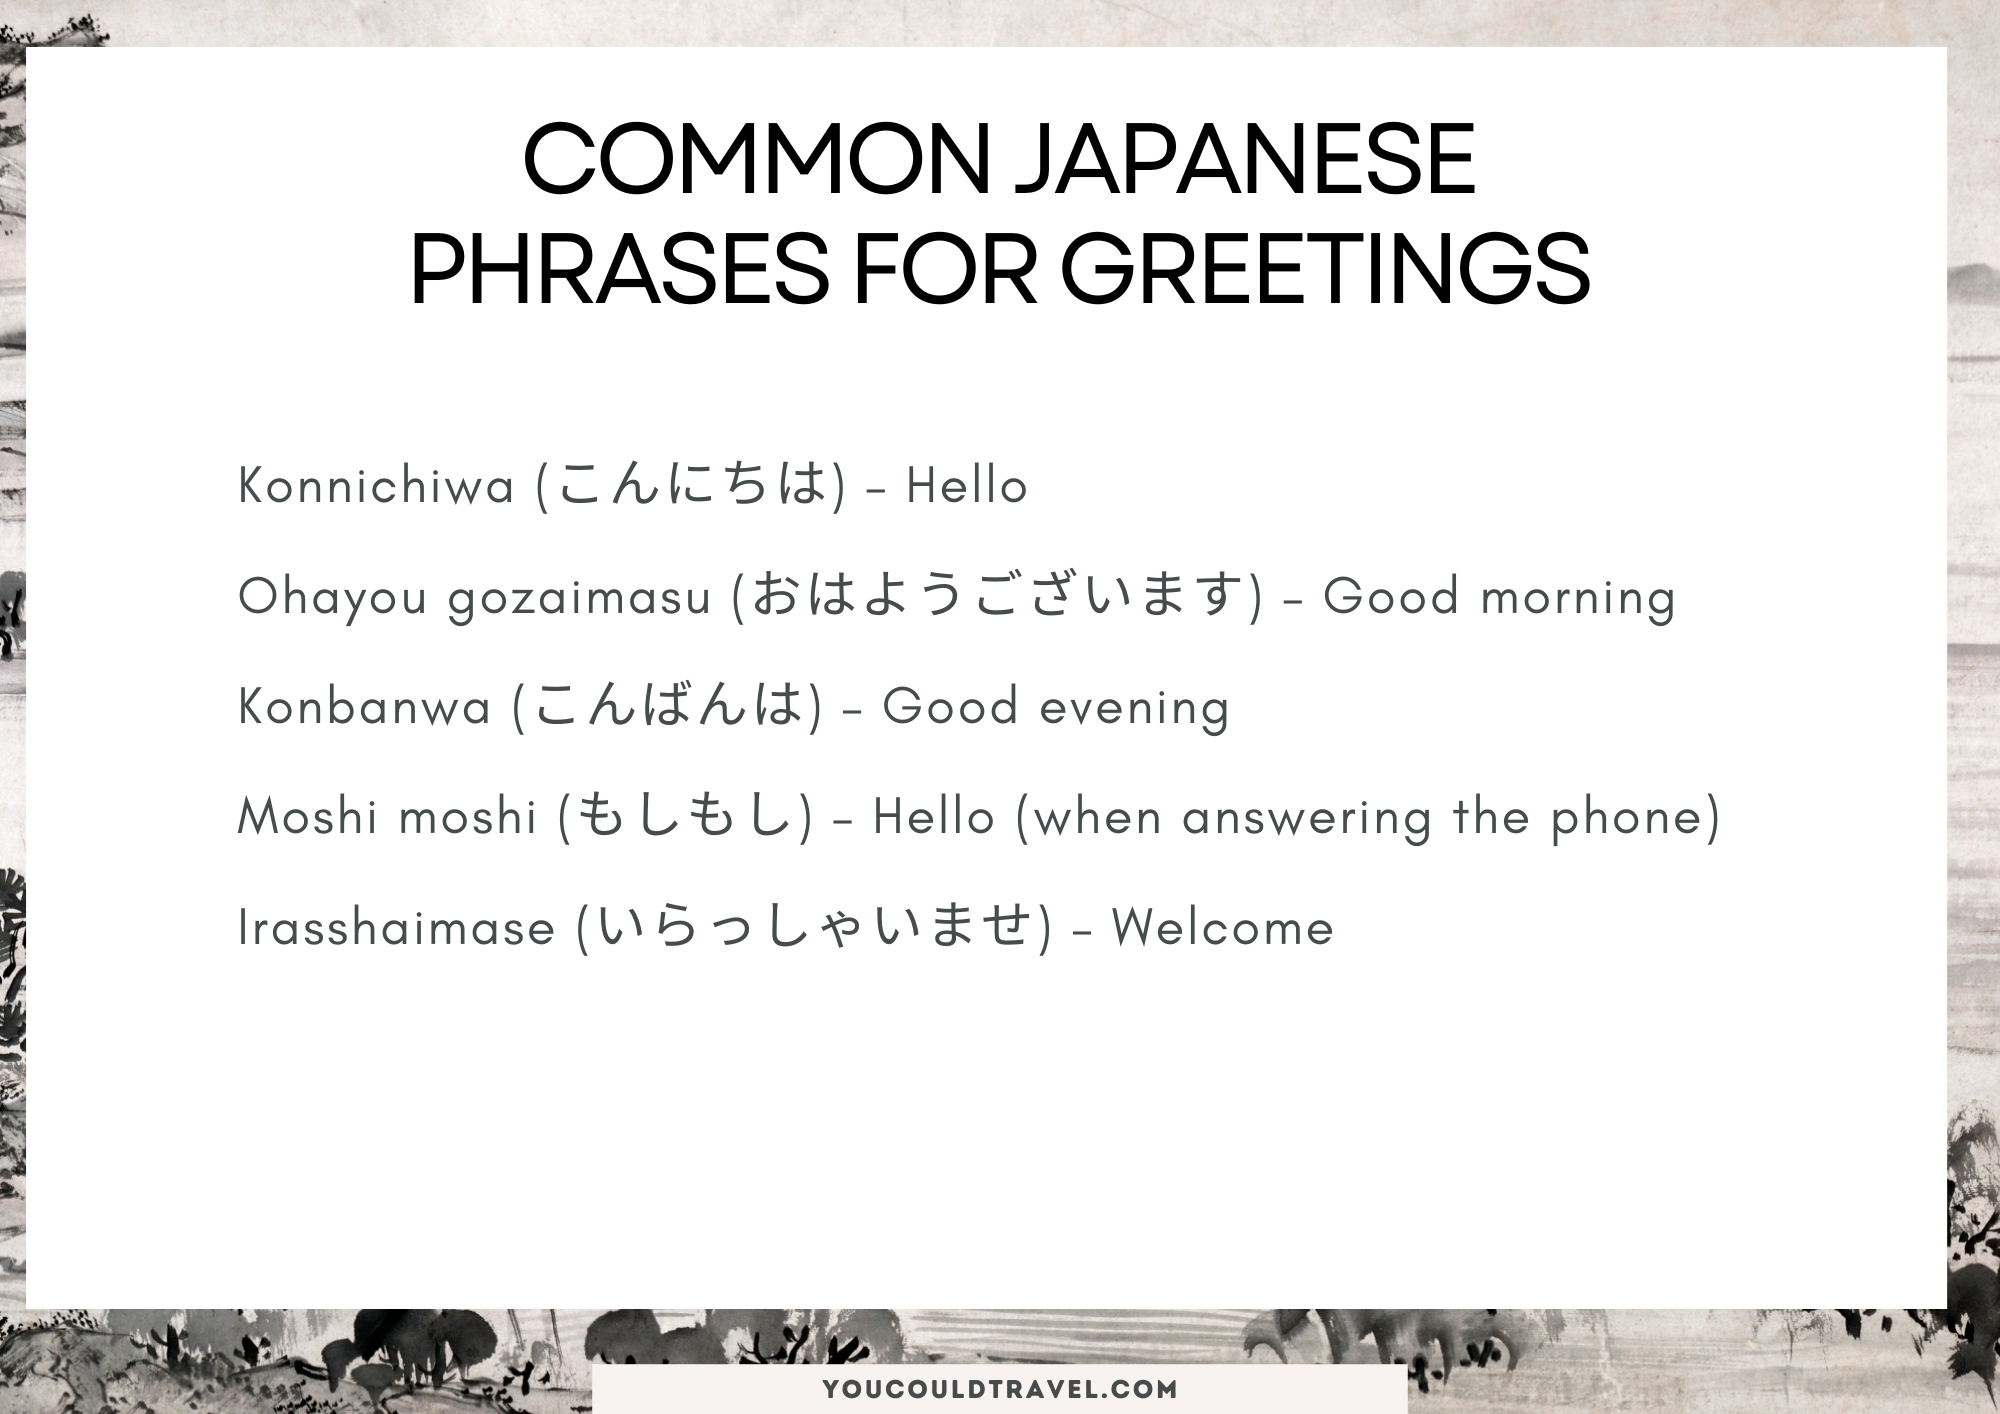 Common Japanese phrases for greetings